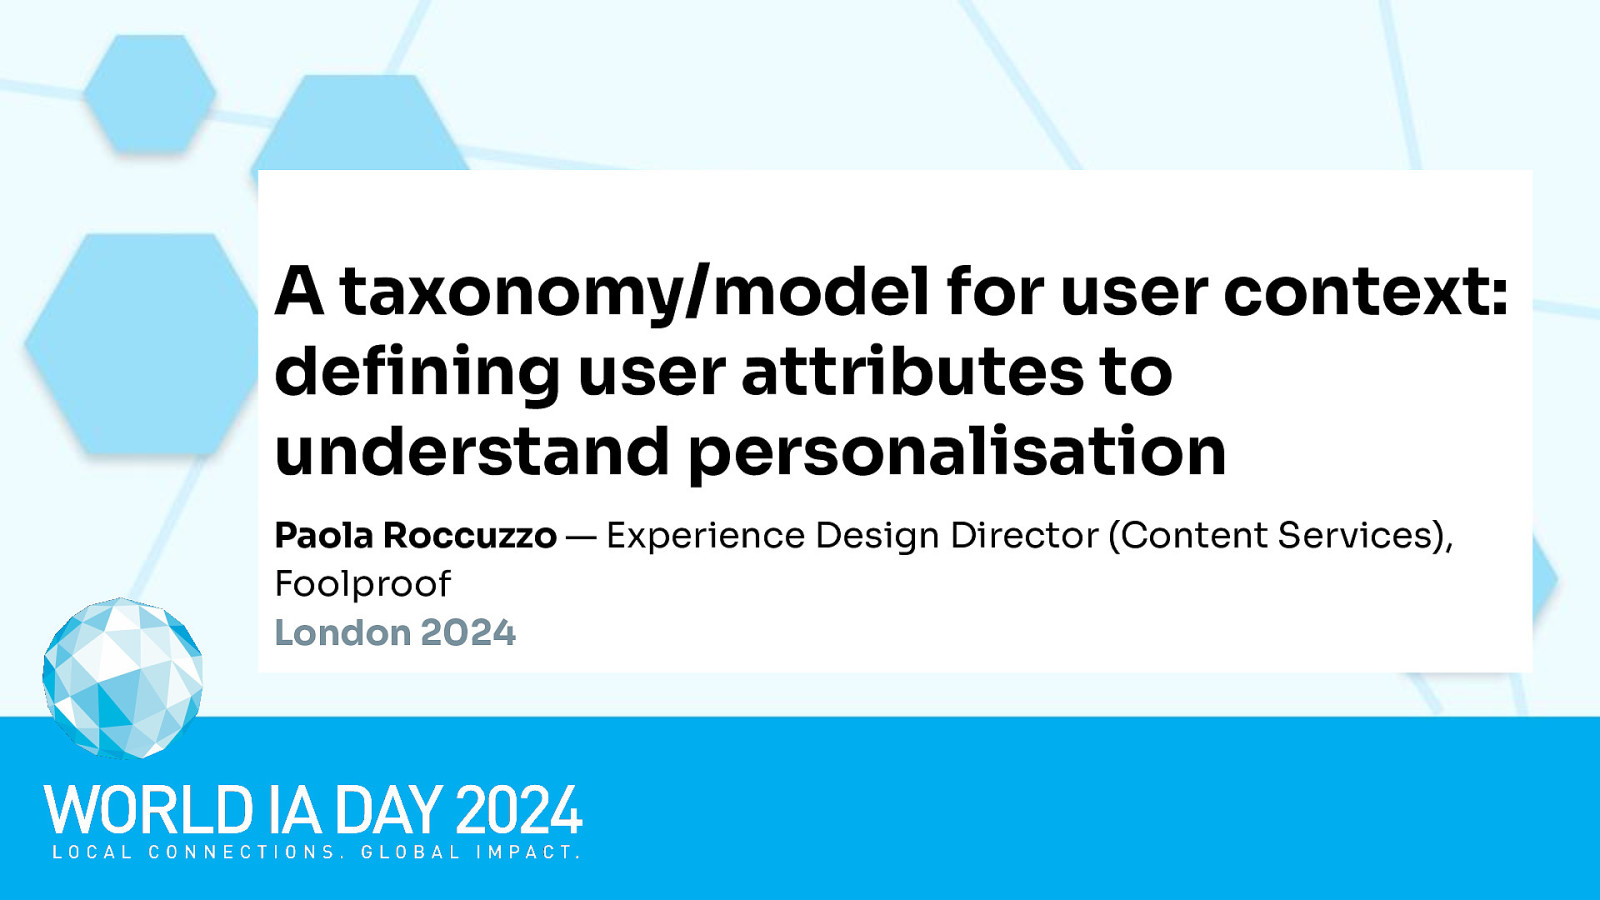 A taxonomy/model for user context with Paola Roccuzzo